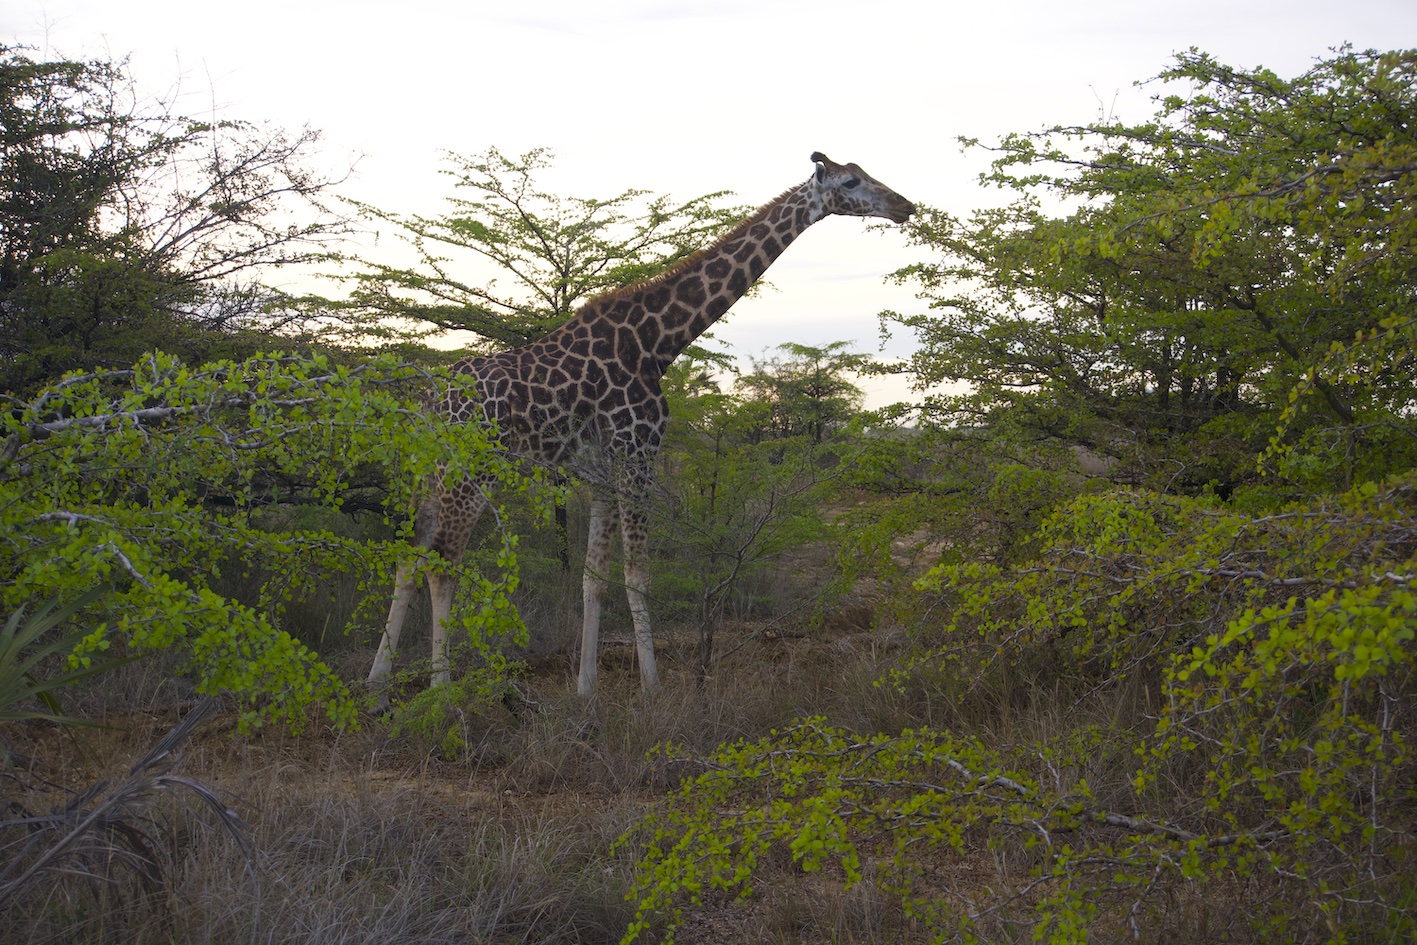 A photo a giraffe eating from a tree at sunset time at the Nguuni park in Mombasa